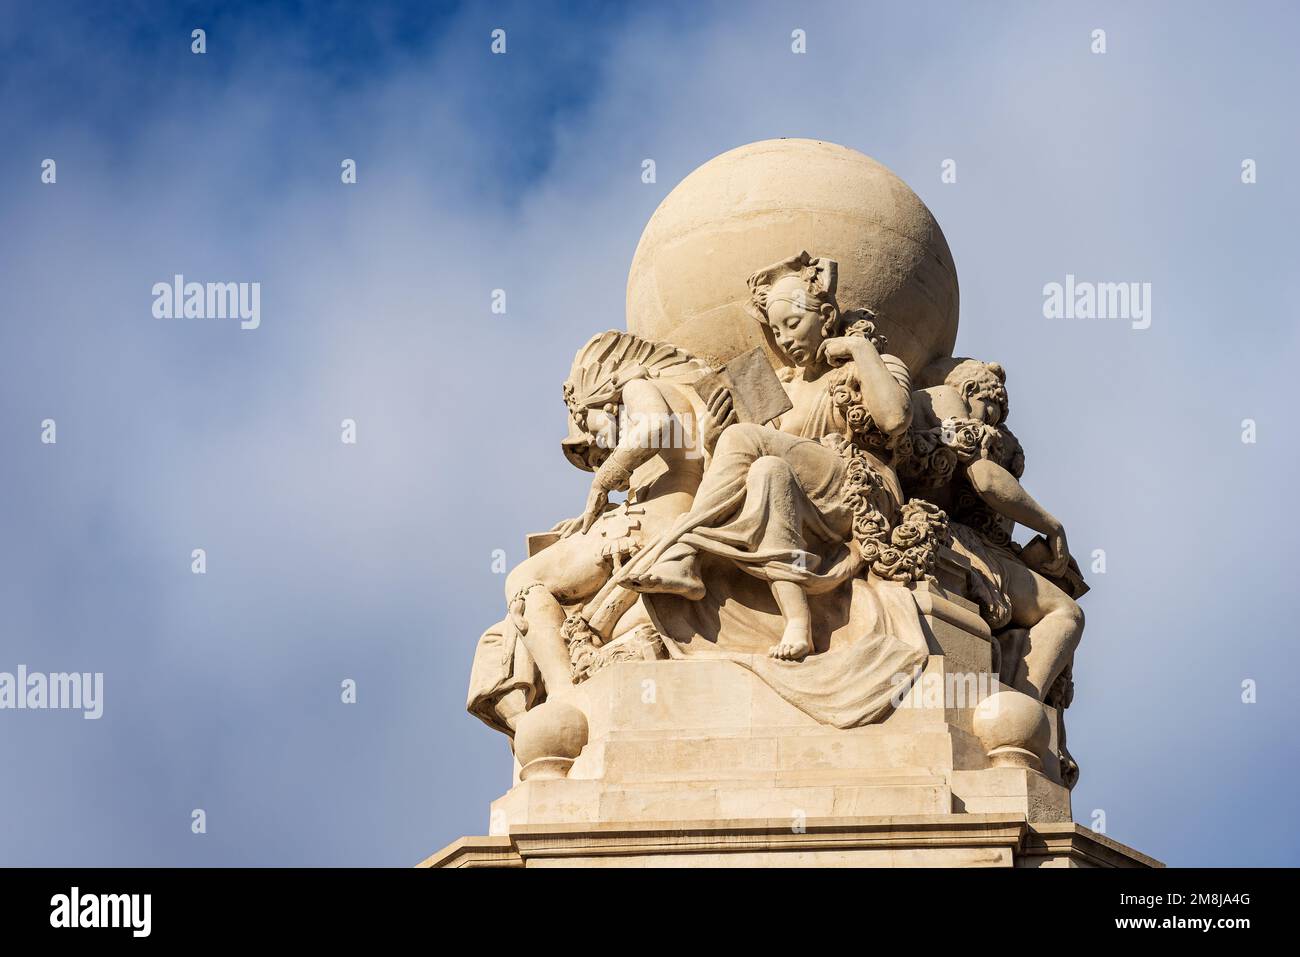 Closeup of the monument and fountain to Miguel de Cervantes, in Plaza de Espana (Spain square), Madrid downtown, community of Madrid, Spain, Europe. Stock Photo